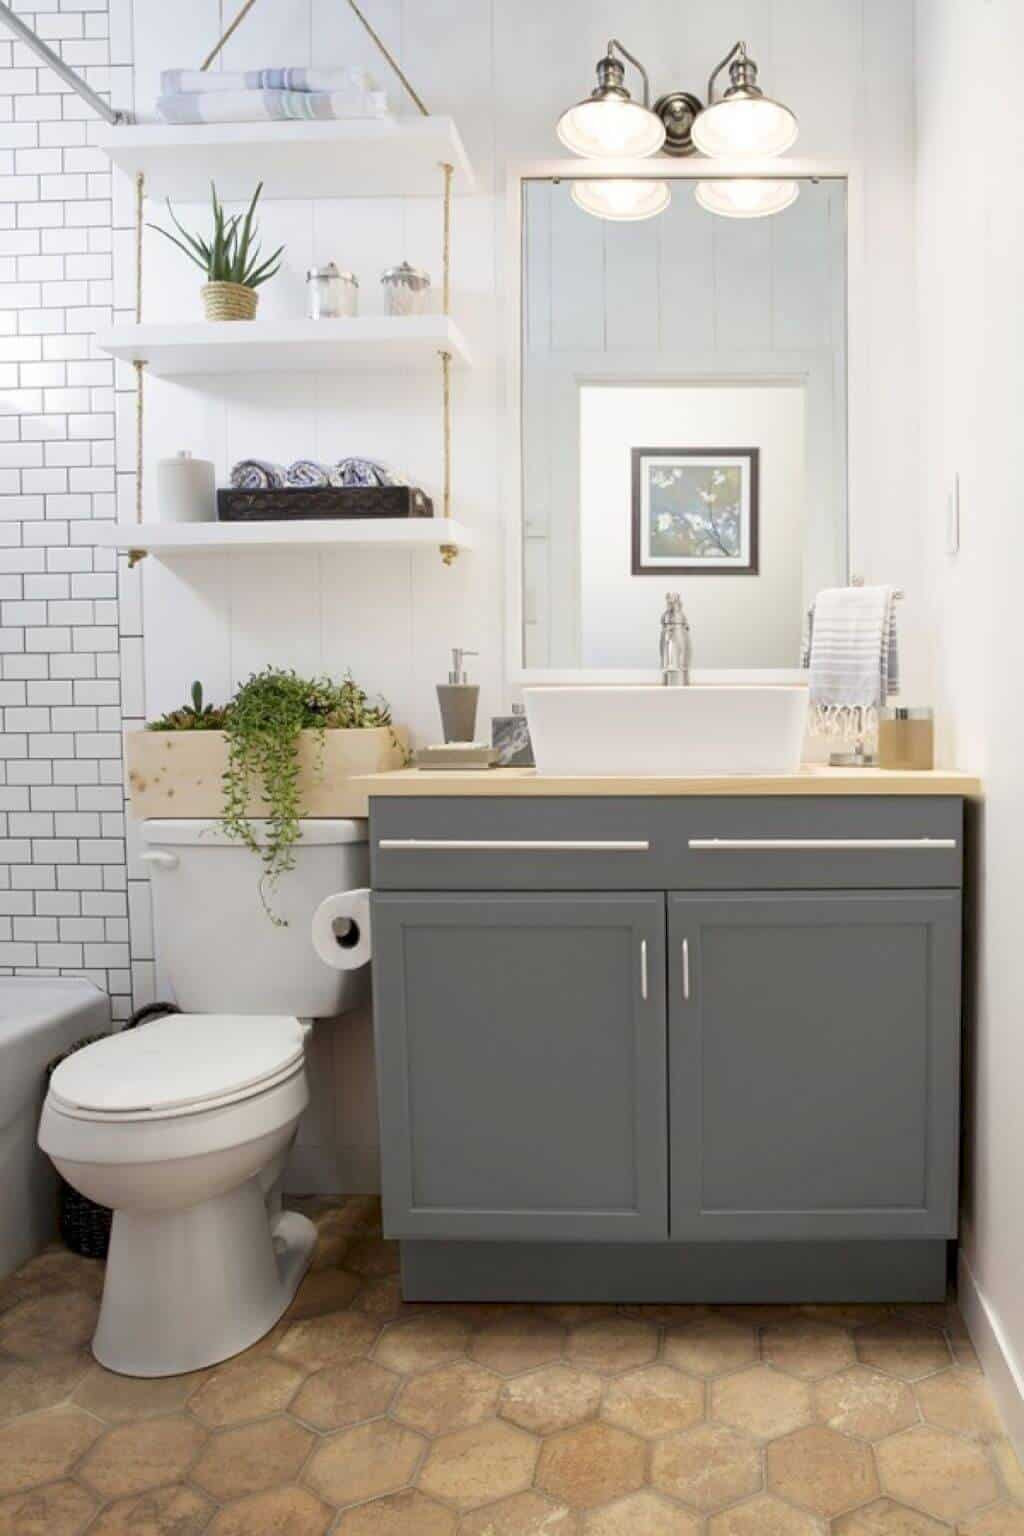 Small Bathroom Design Ideas
 32 Ideas of Bathroom Remodels for Small Spaces You’ll Want